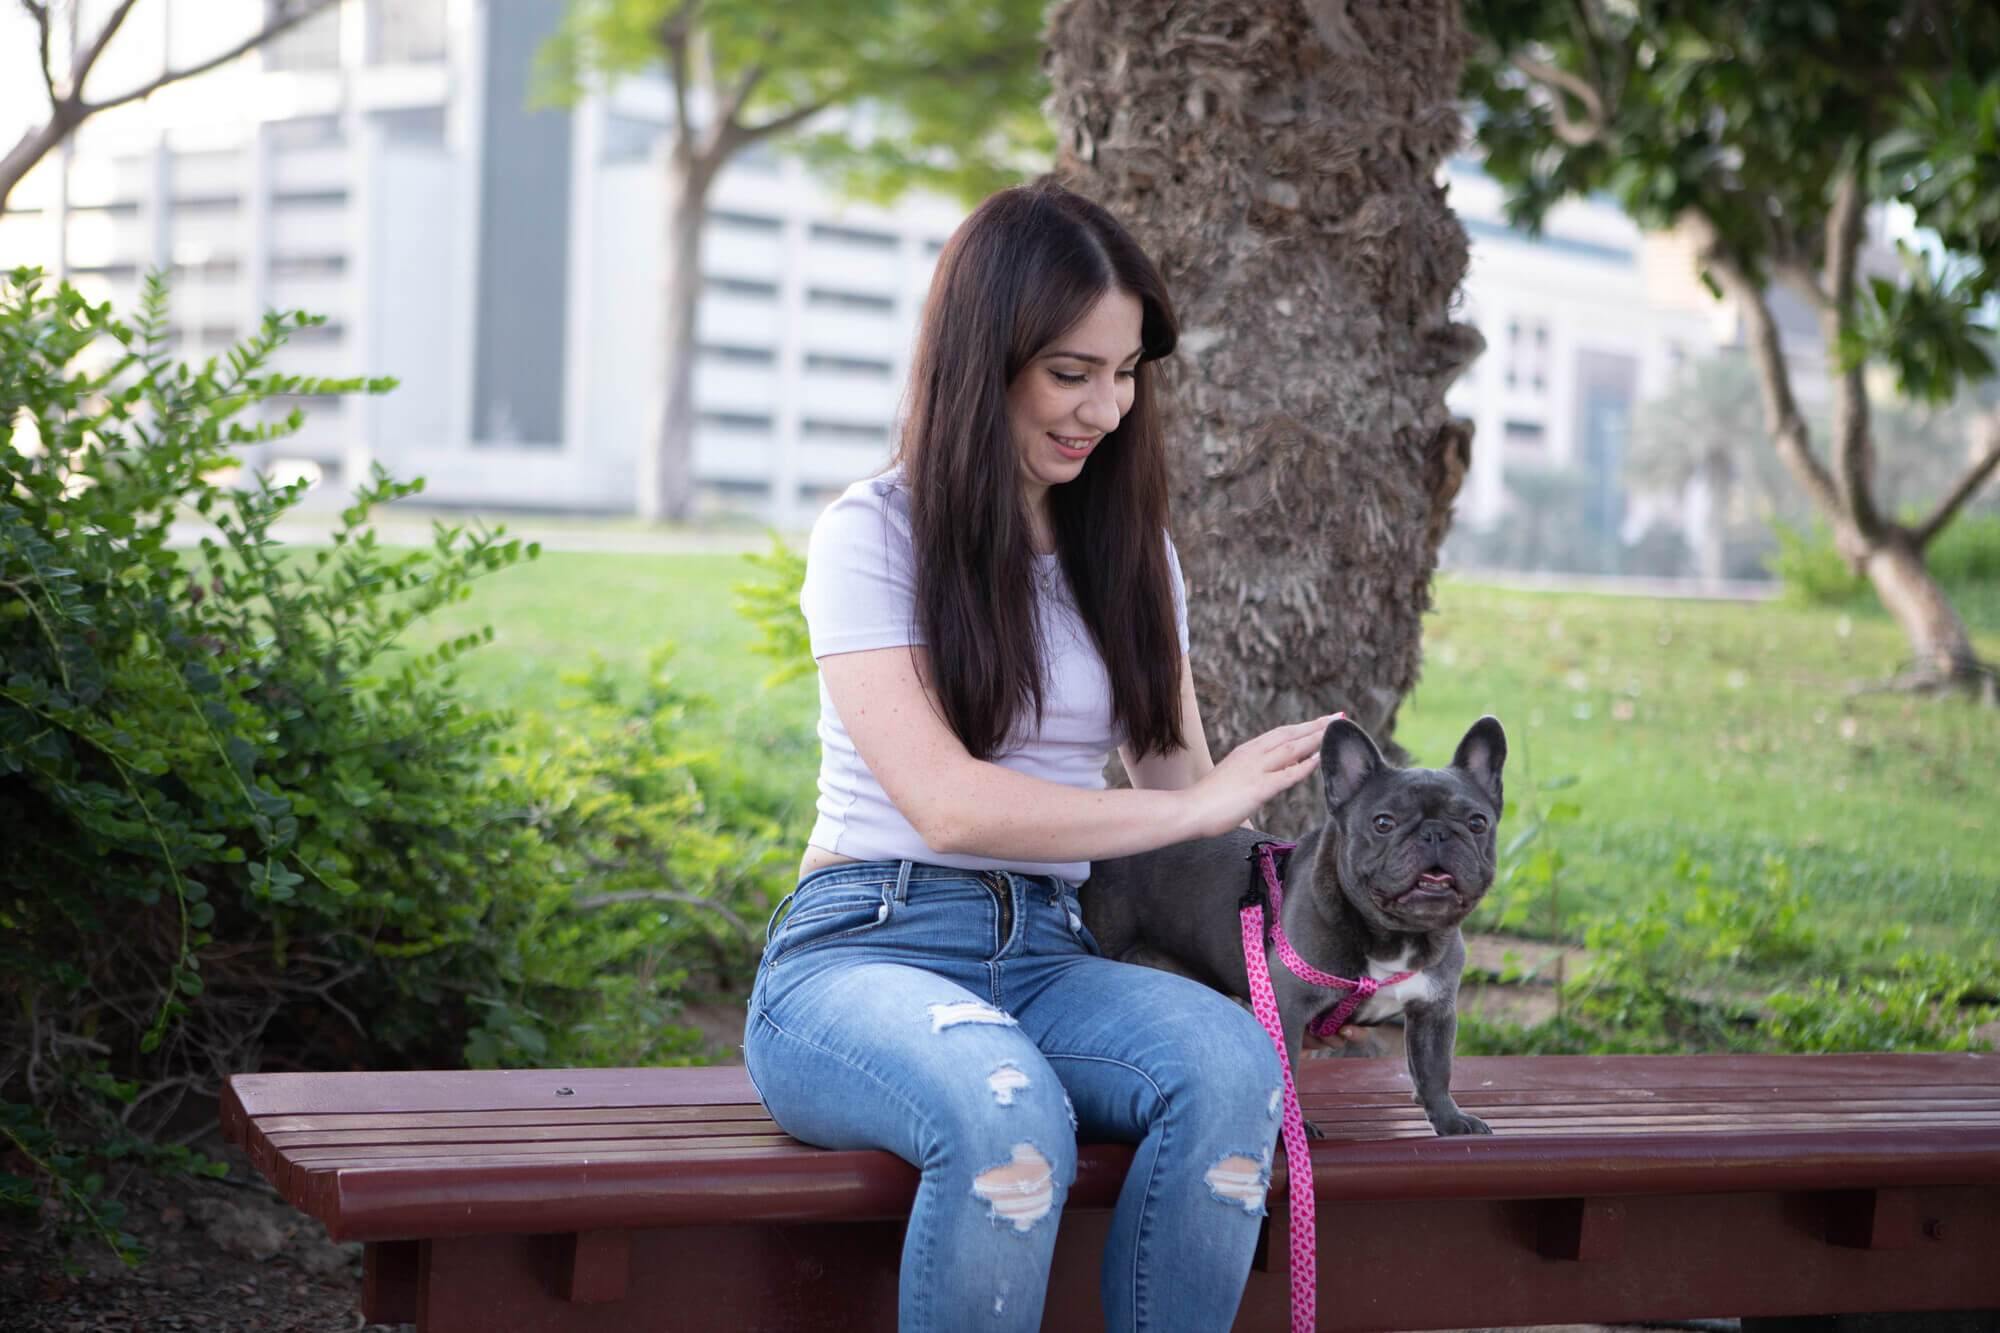 Why Millennials Are Choosing to Raise Pets Instead of Children